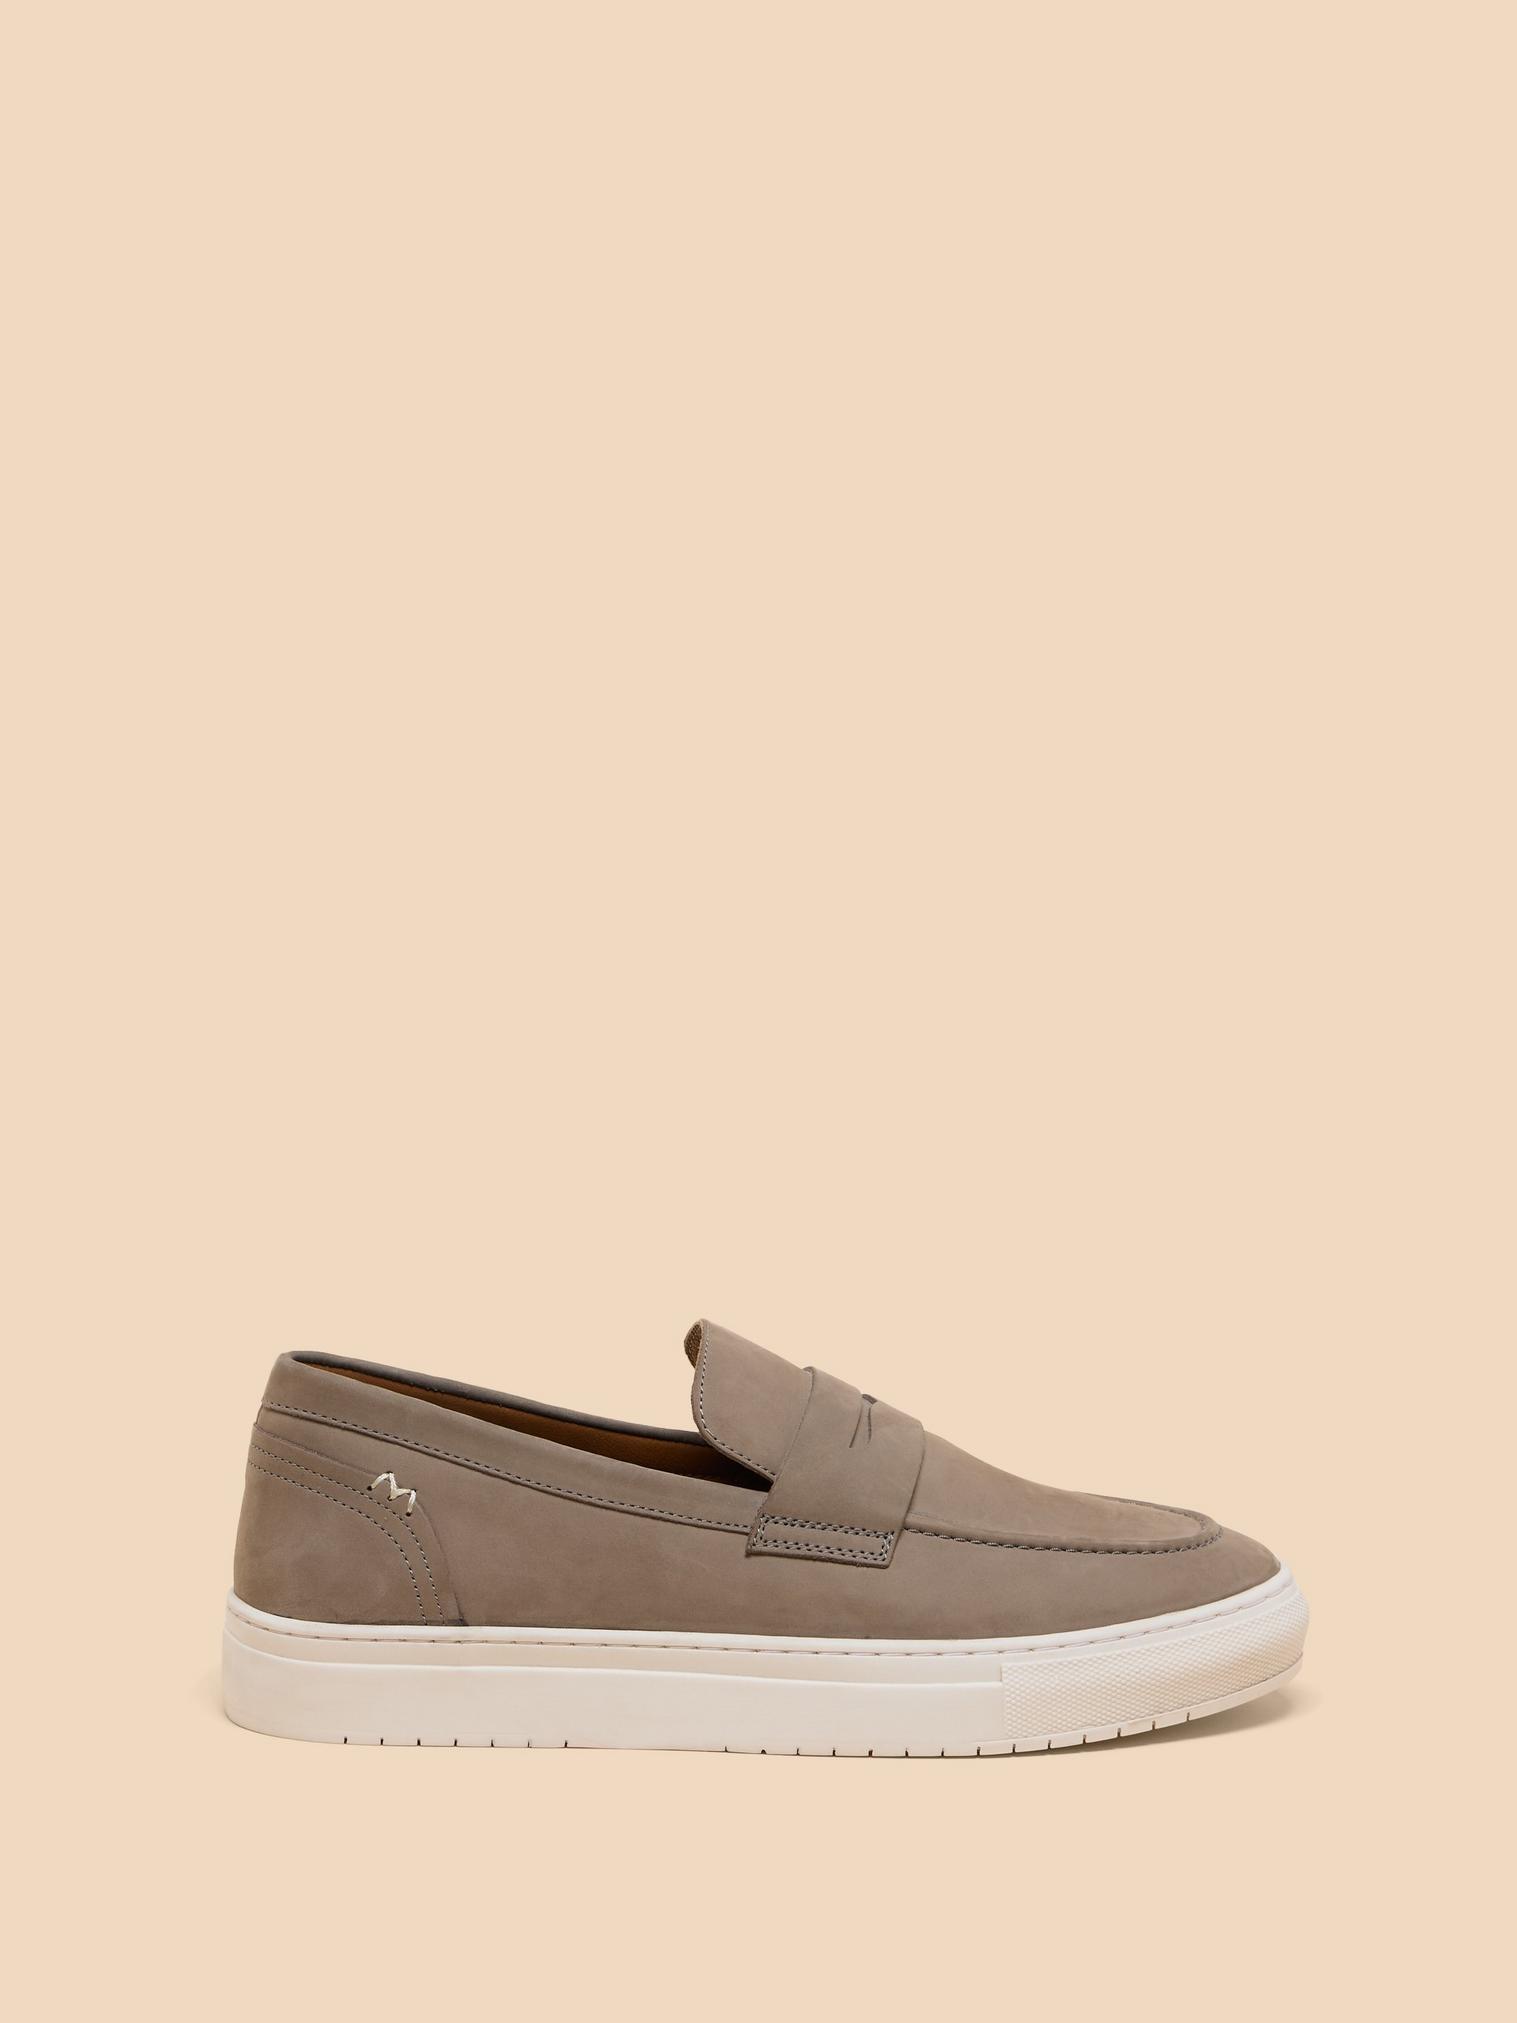 Lenny Leather Loafer in MID GREY - LIFESTYLE